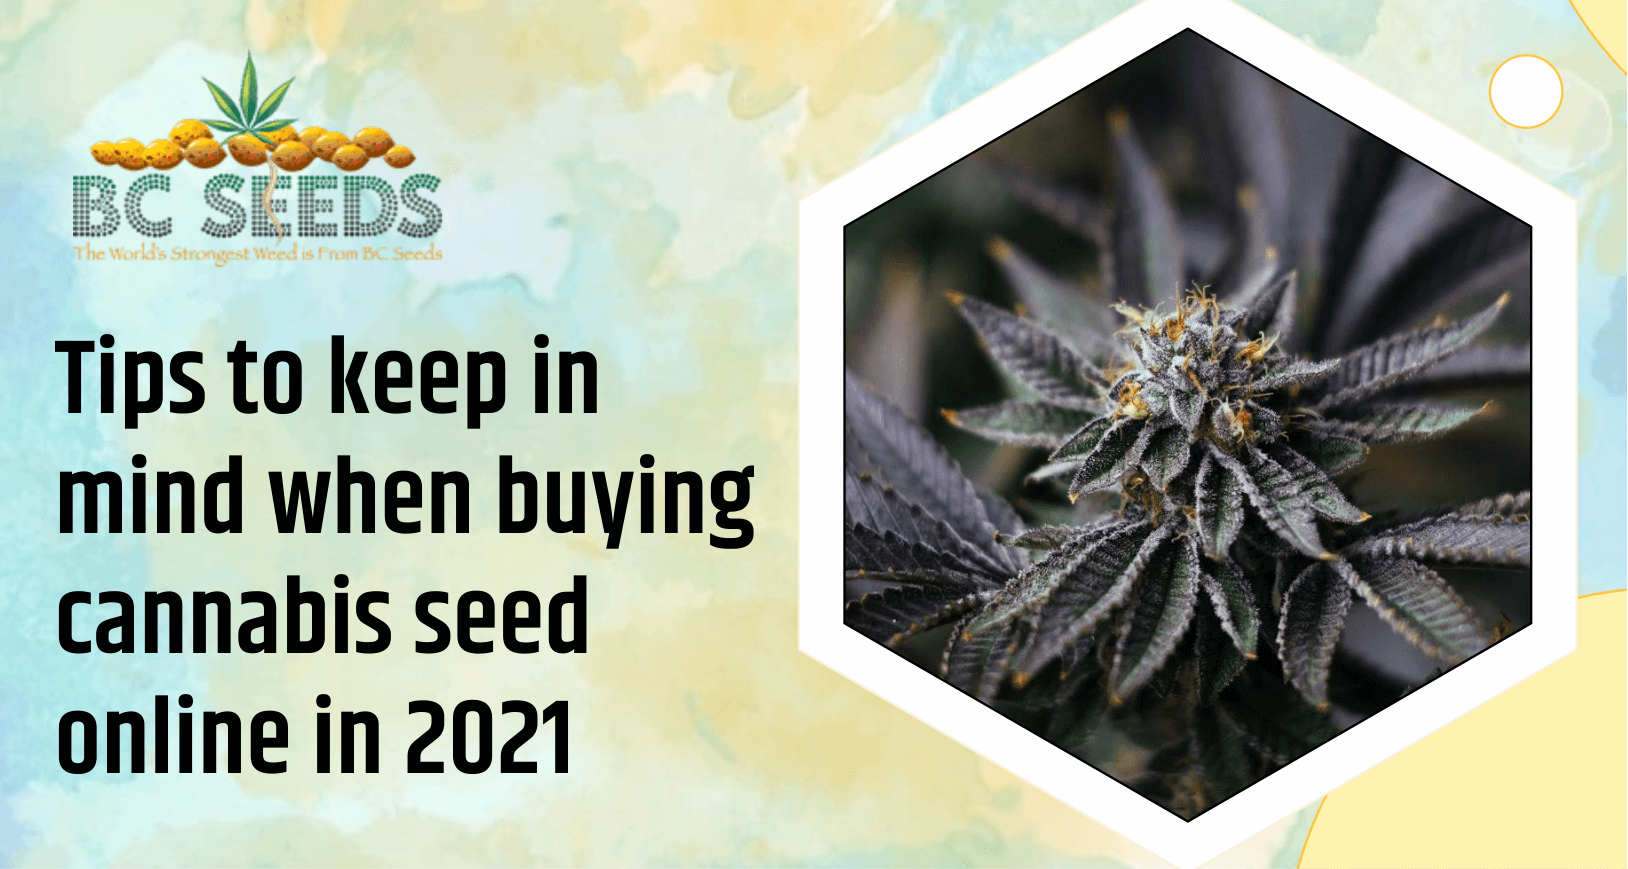 Tips for Buying Cannabis Seed Online in 2021